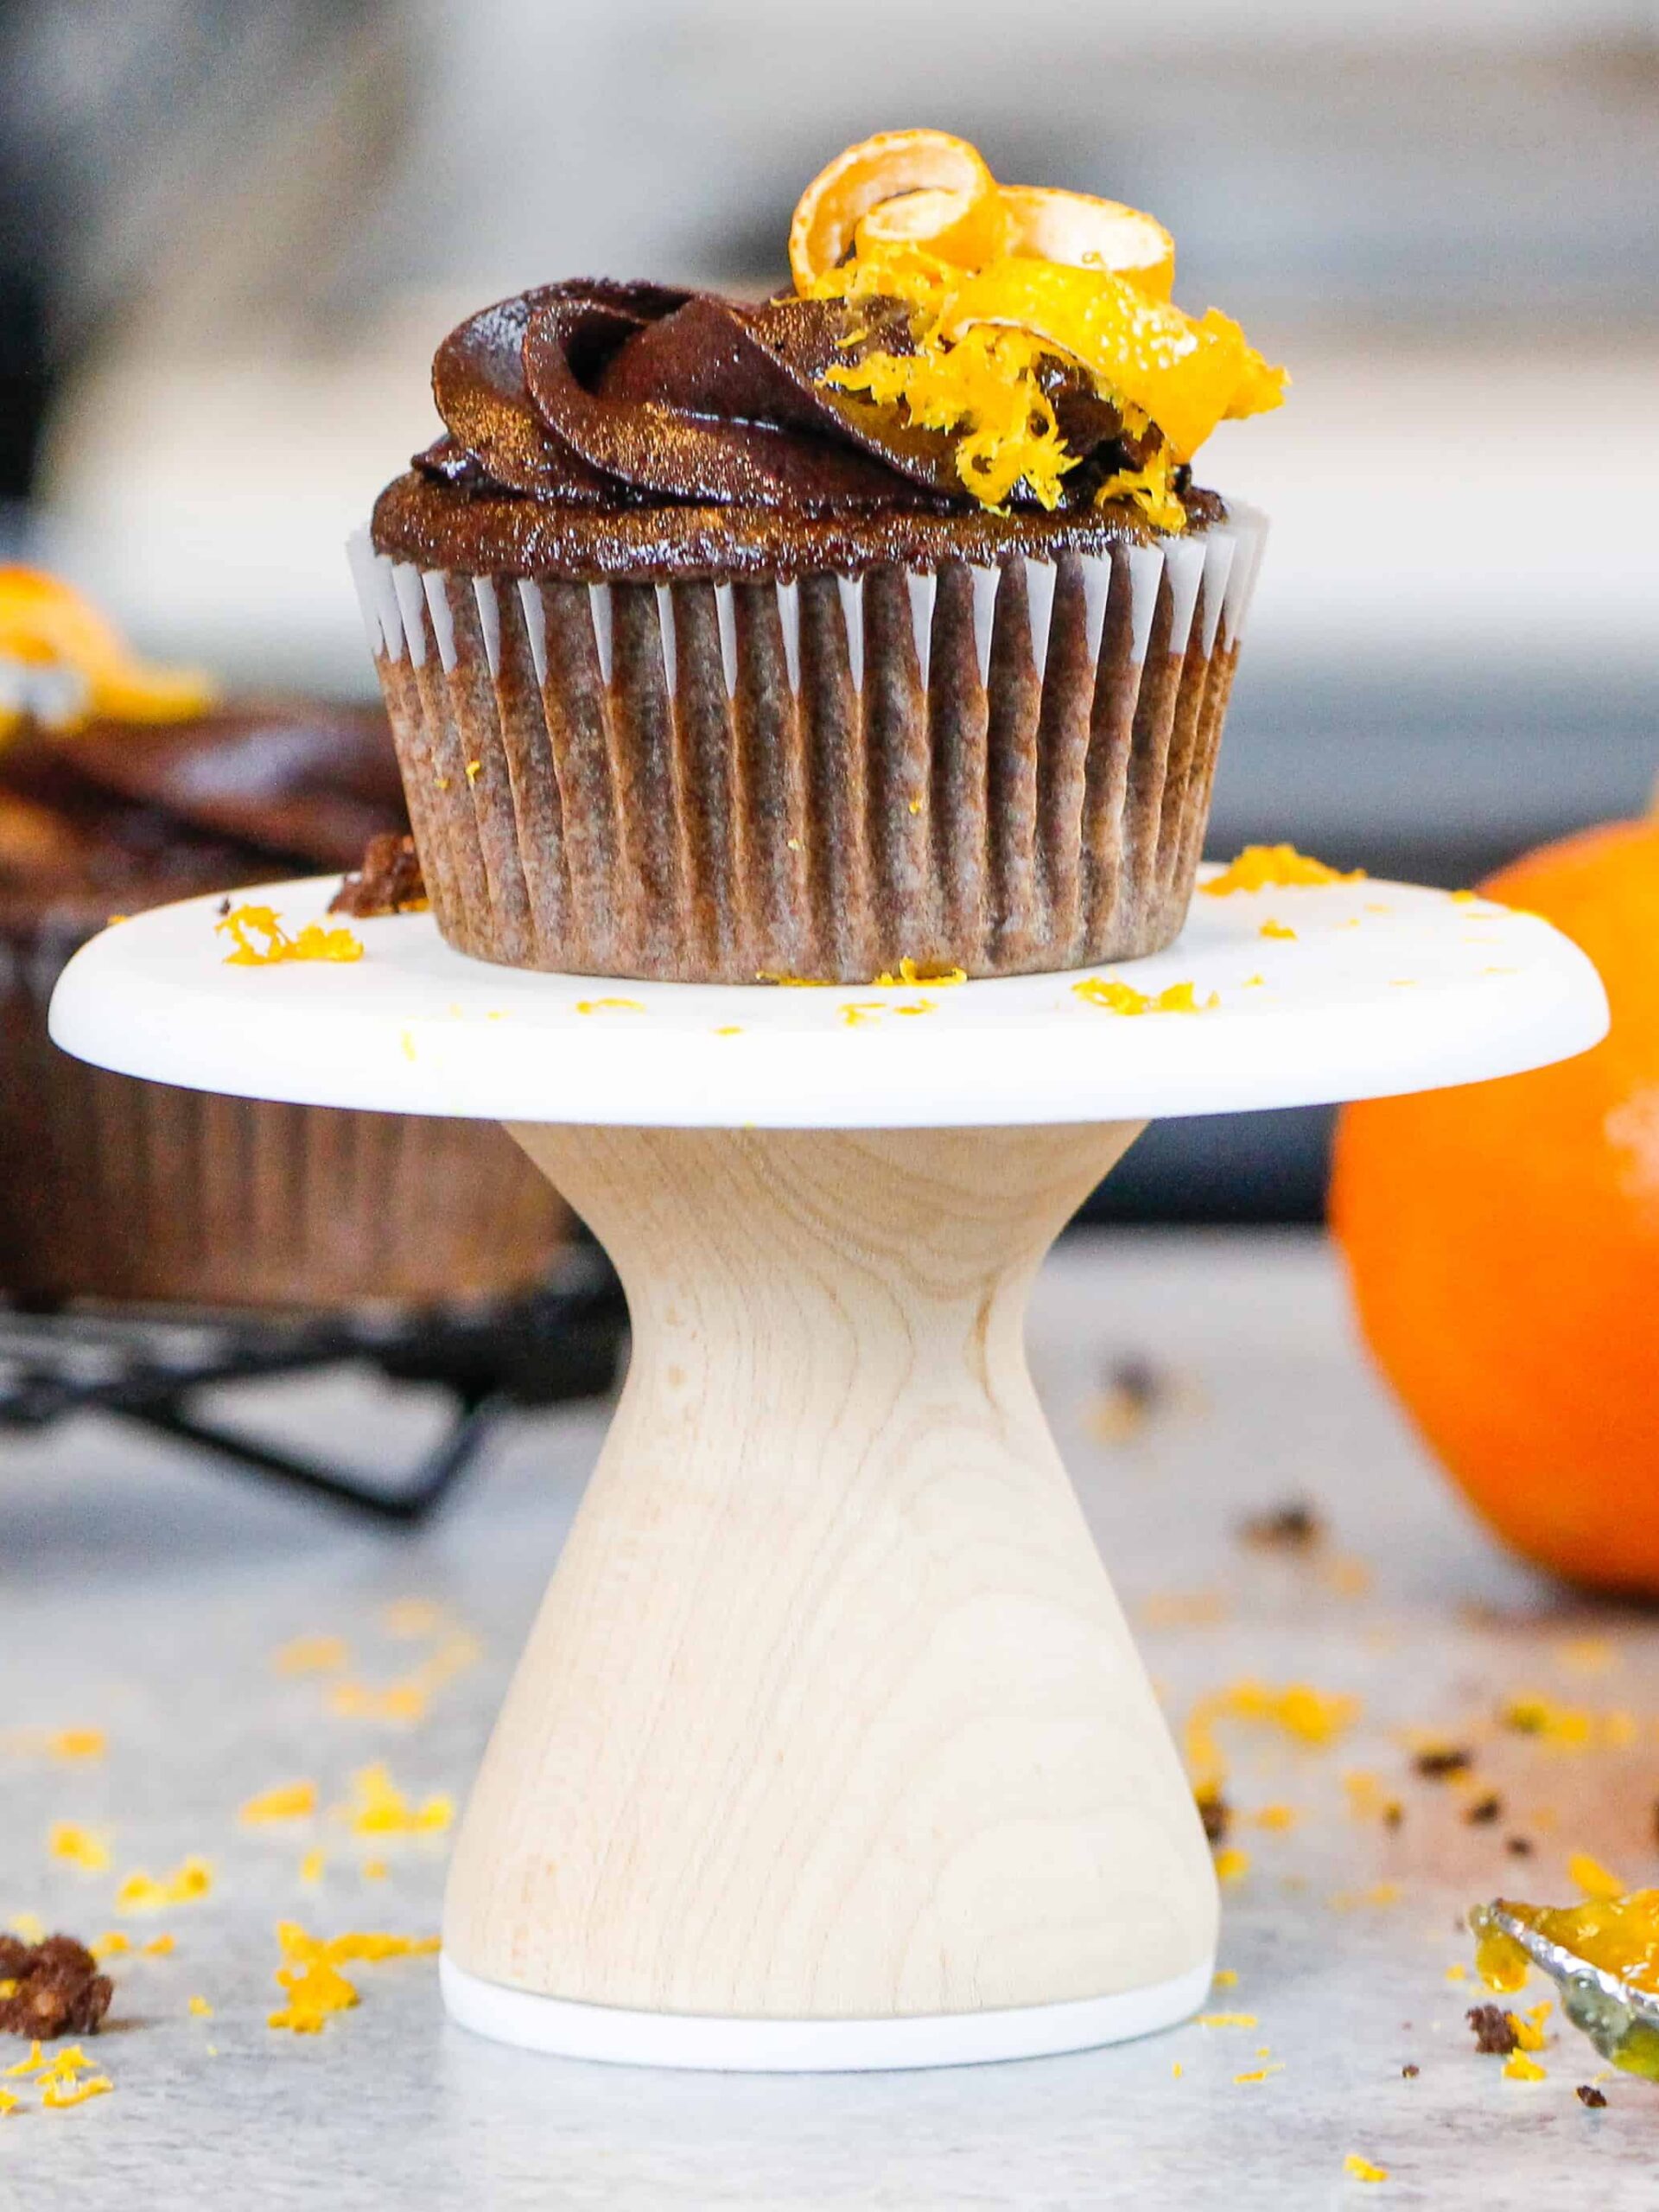 image of a chocolate orange cupcake decorated with chocolate orange buttercream frosting